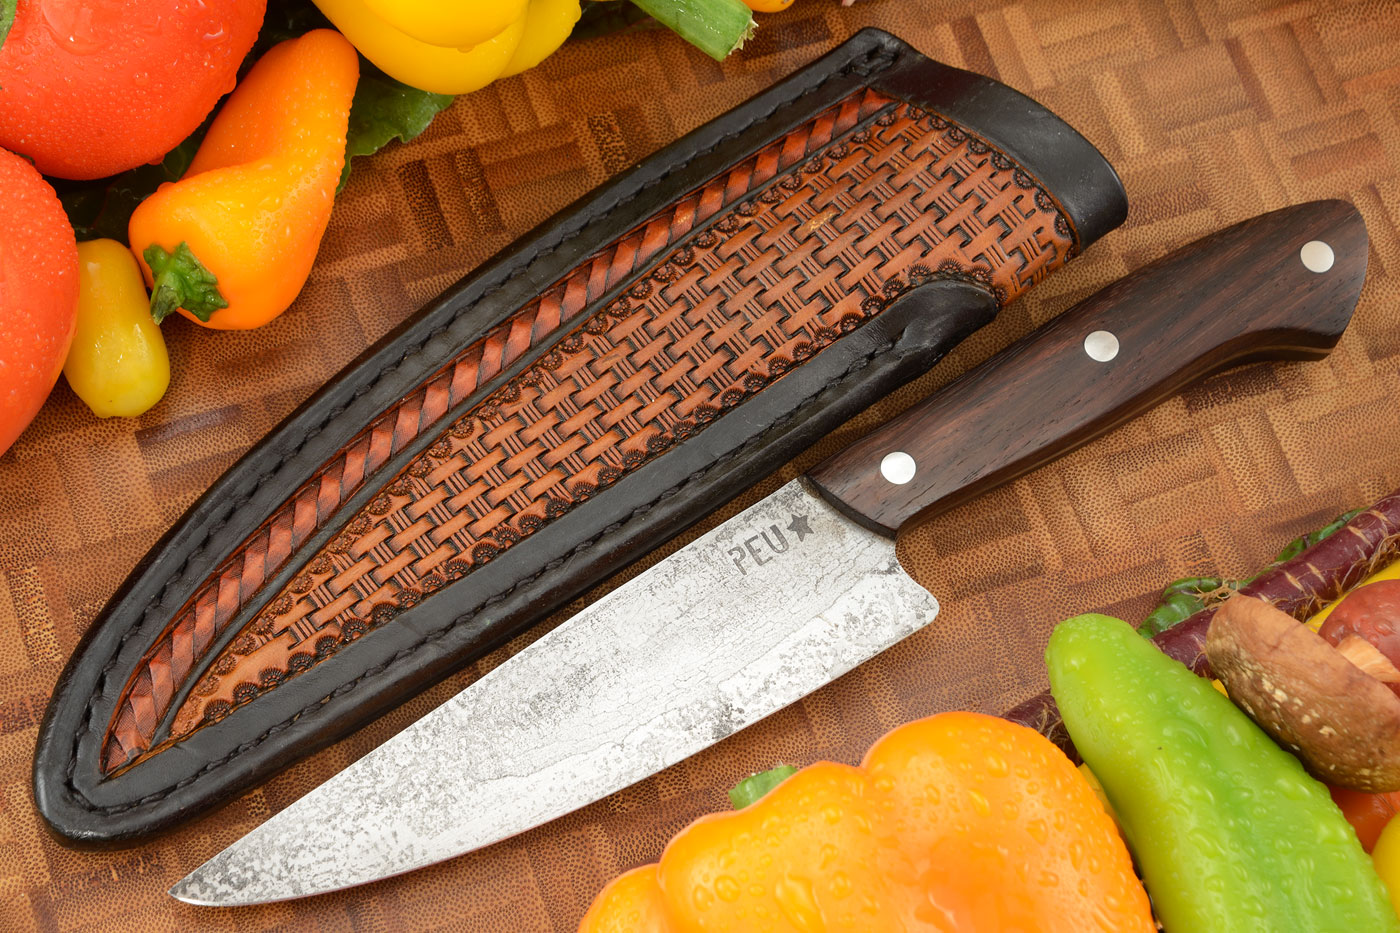 Chef's Utility Knife (Parrillero) with Pau Ferro Wood and O2 Carbon Steel